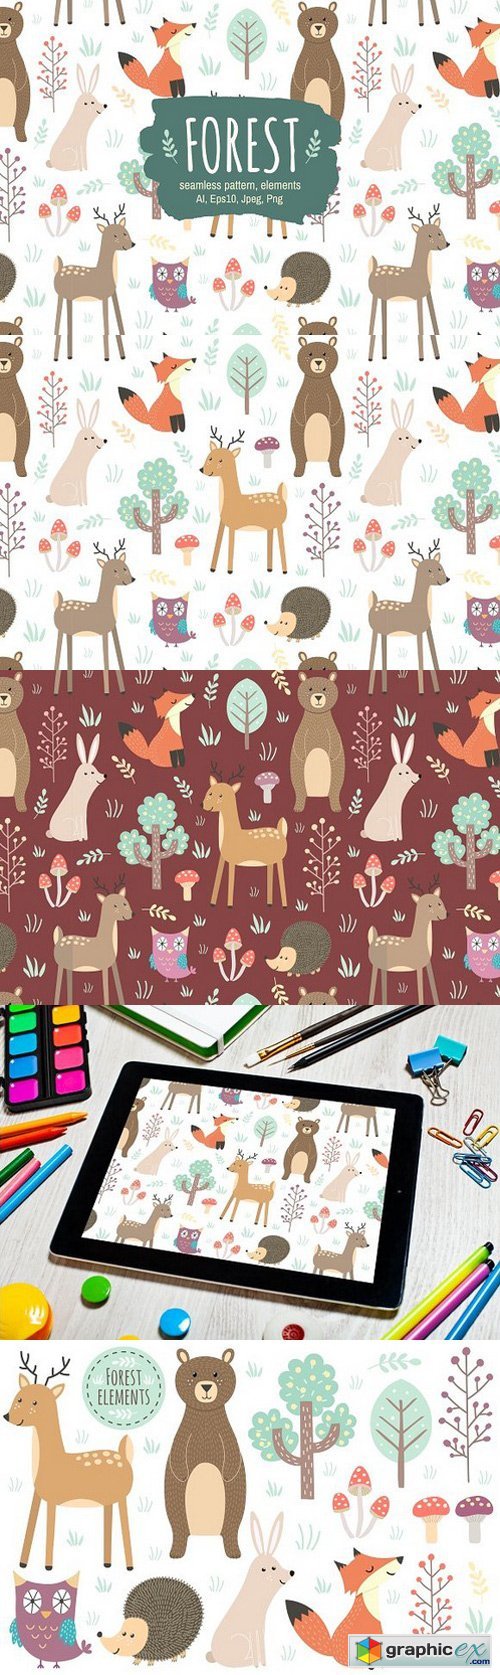 Forest: seamless pattern & elements